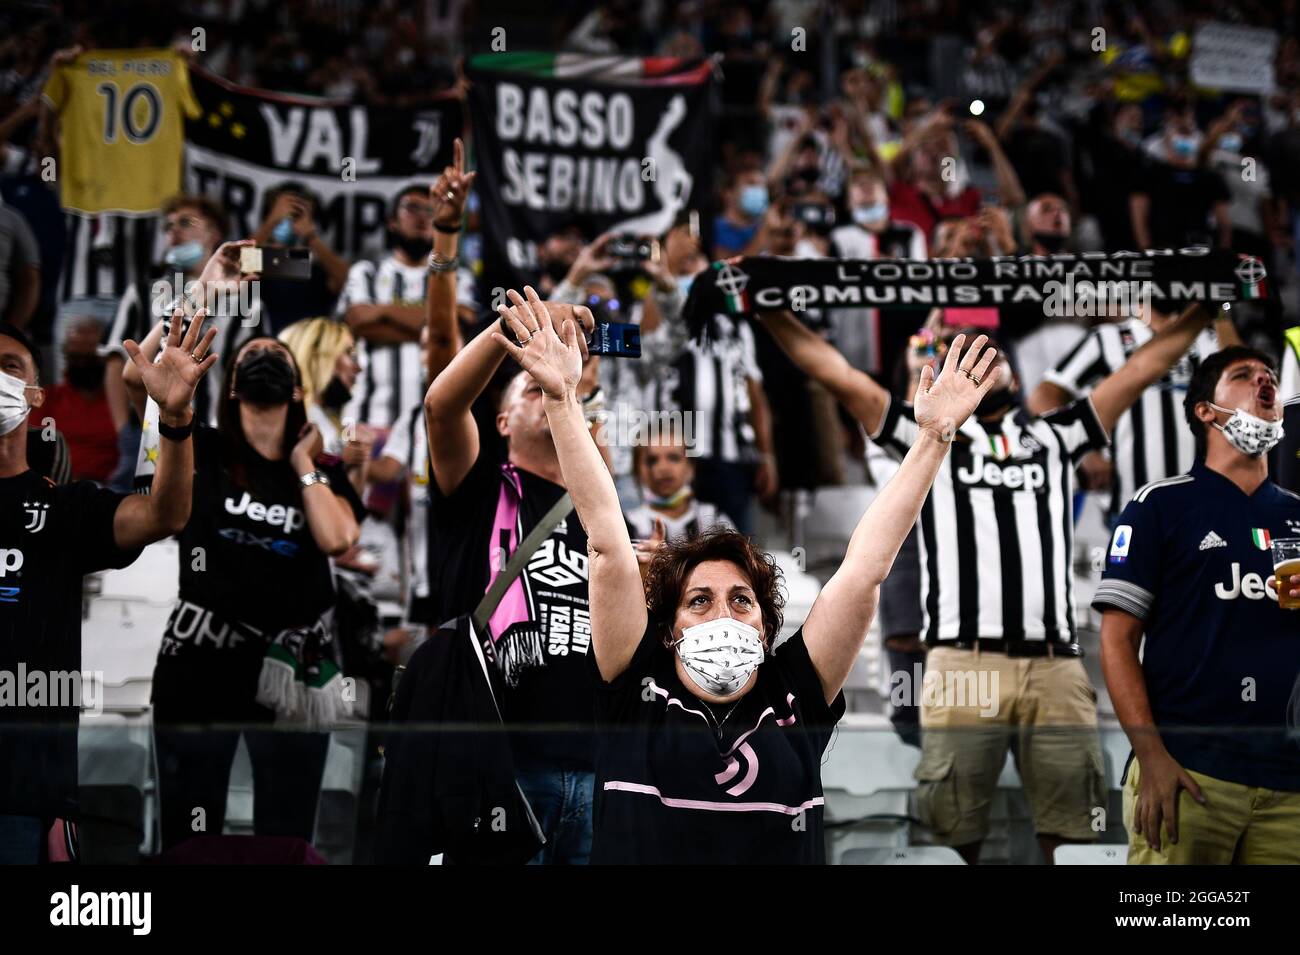 A Juventus soccer fan shows a scarf to remember the Heysel tragedy at the  King Baudouin stadium in Brussels, Sunday May 29, 2005. Fans from Britain,  Italy and Belgium marked the Heysel